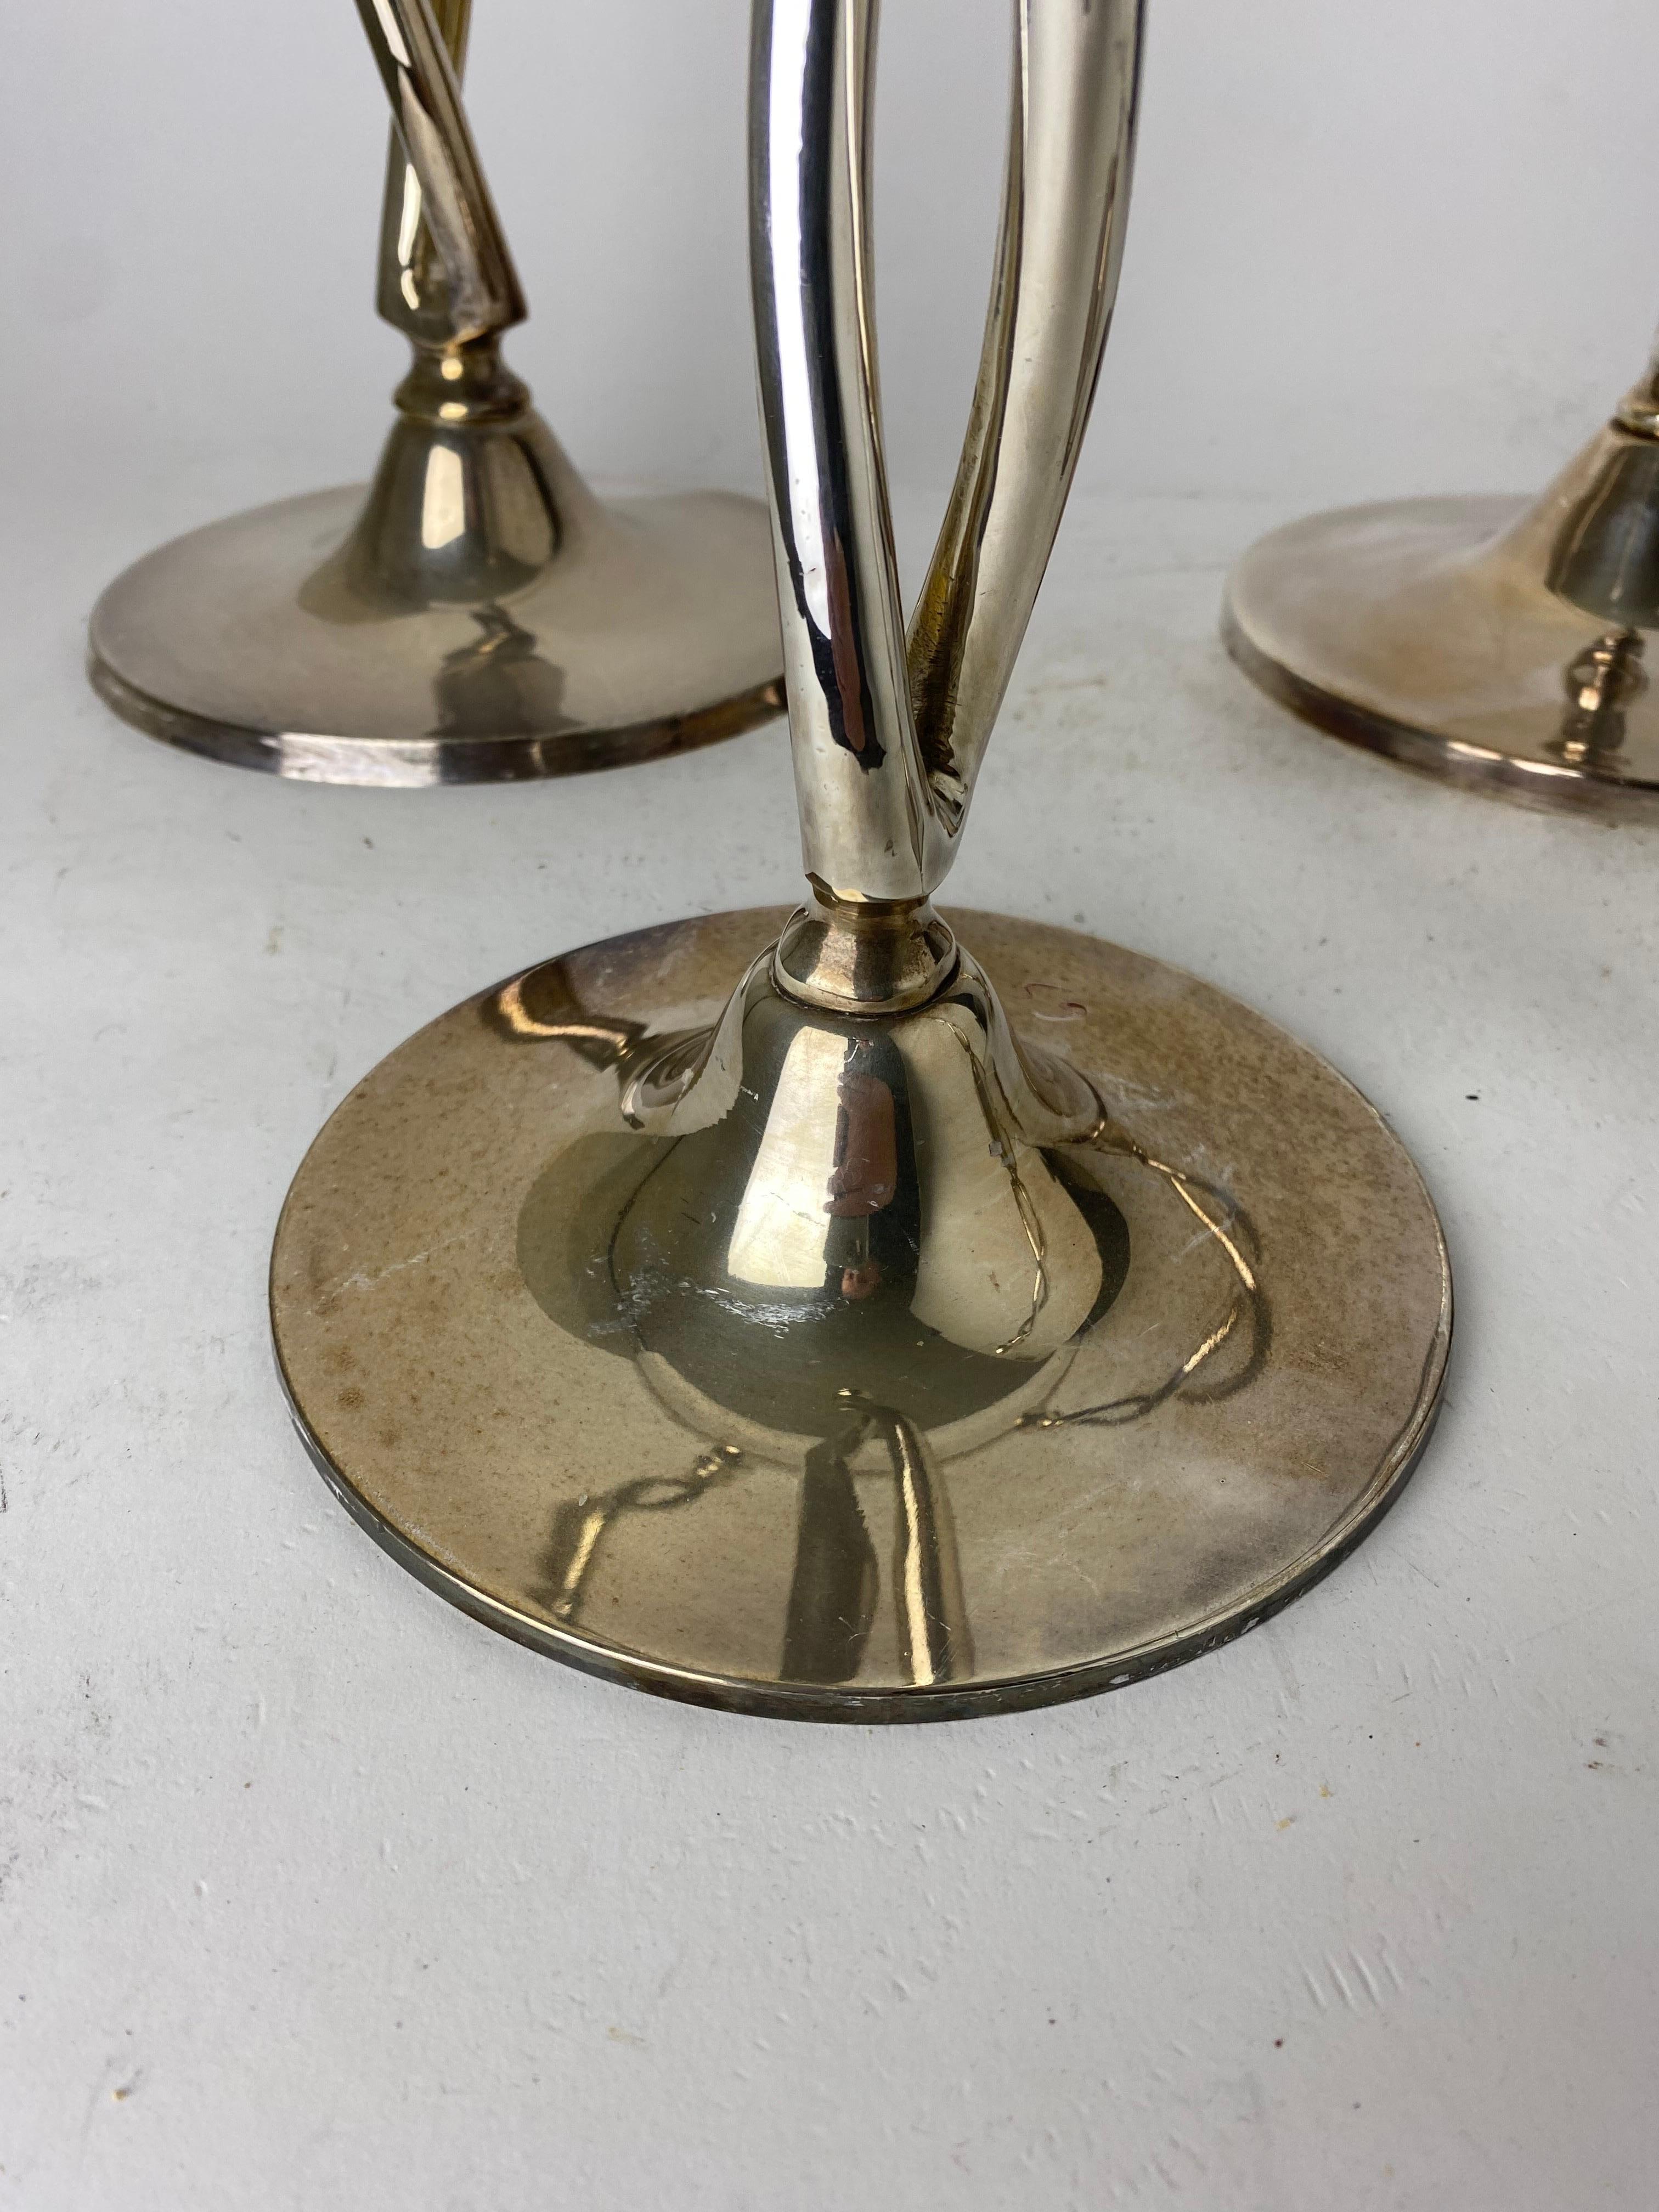 Silver Plate 1990s Ralph Lauren Hollinsworth Twist Silver-Plate Candle Holders - Set of 4